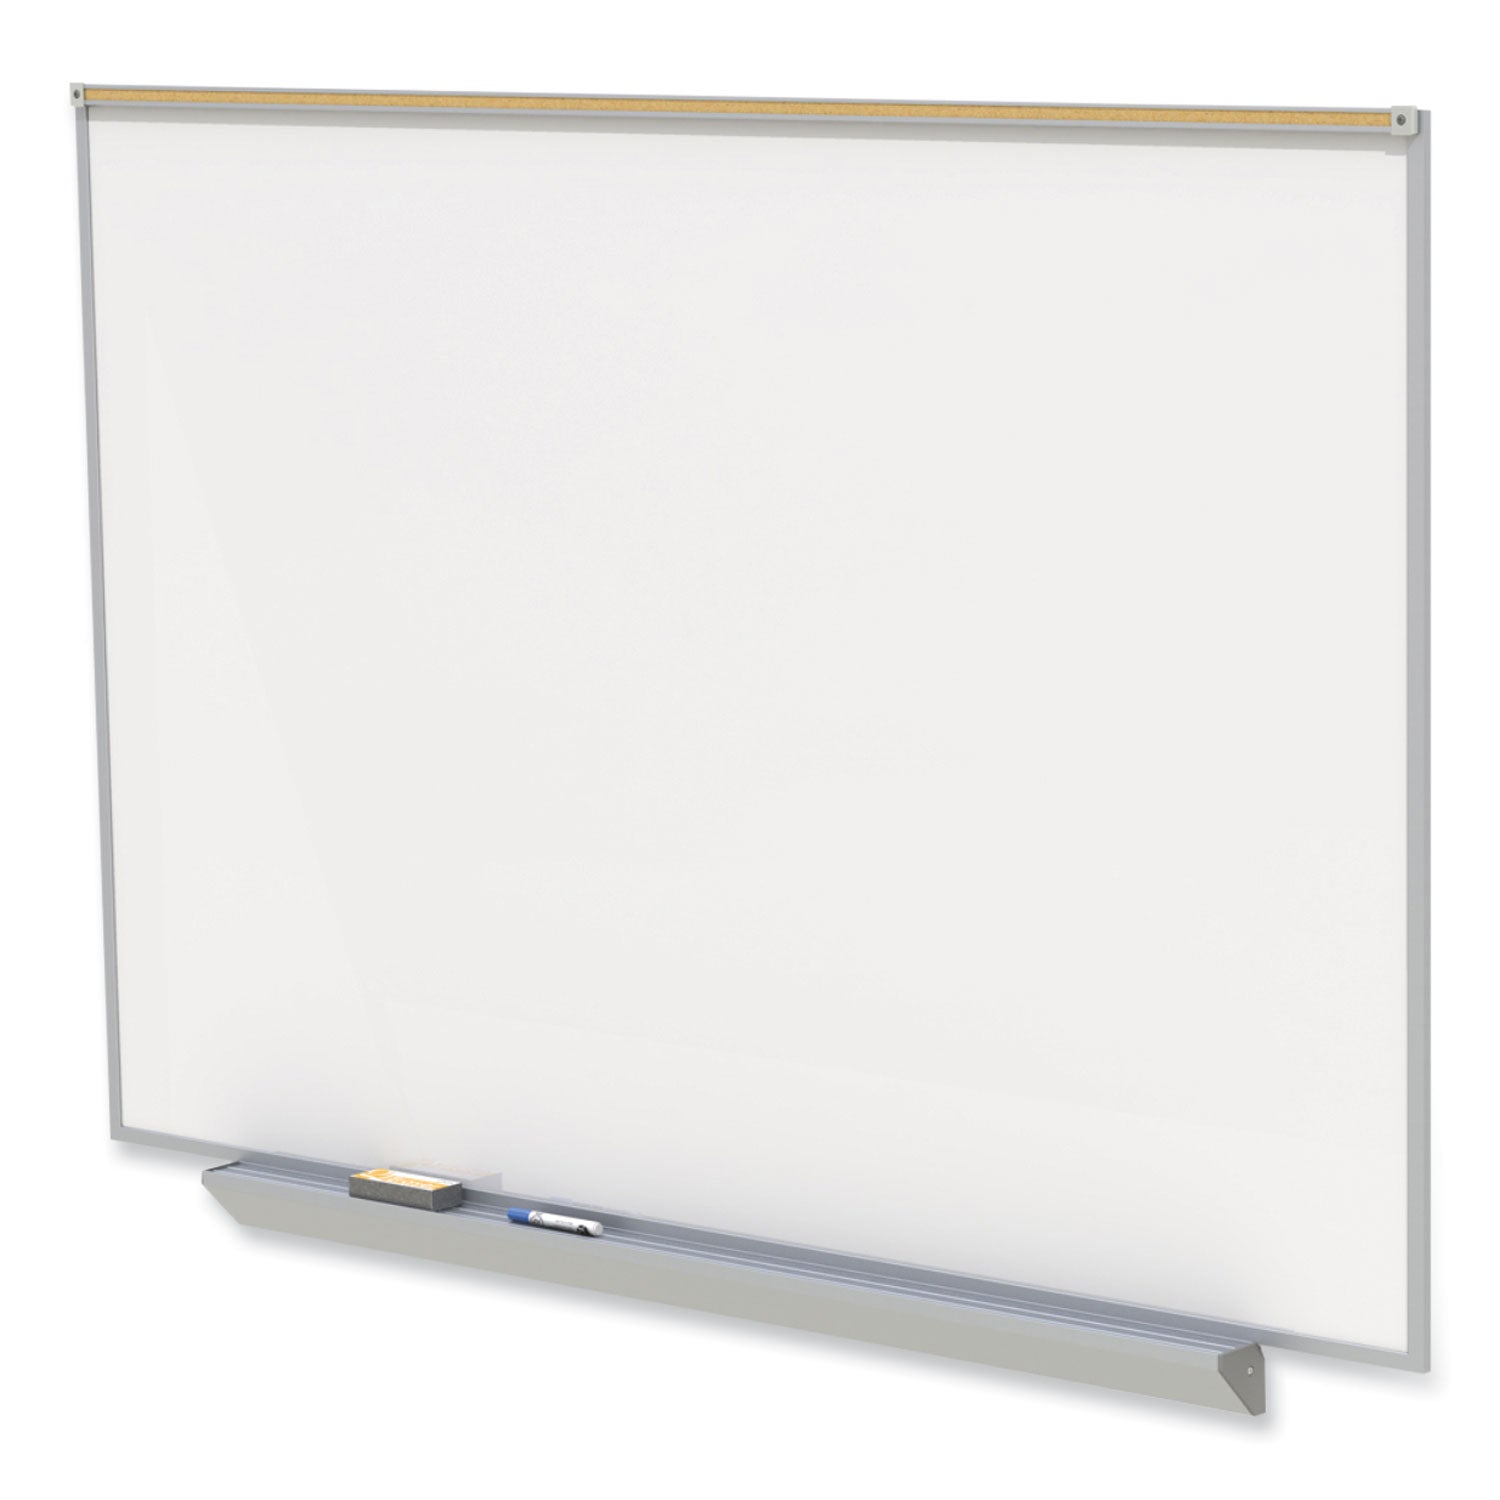 proma-magnetic-porcelain-projection-whiteboard-w-satin-aluminum-frame-485-x-365-white-surfaceships-in-7-10-business-days_gheprm1344 - 2